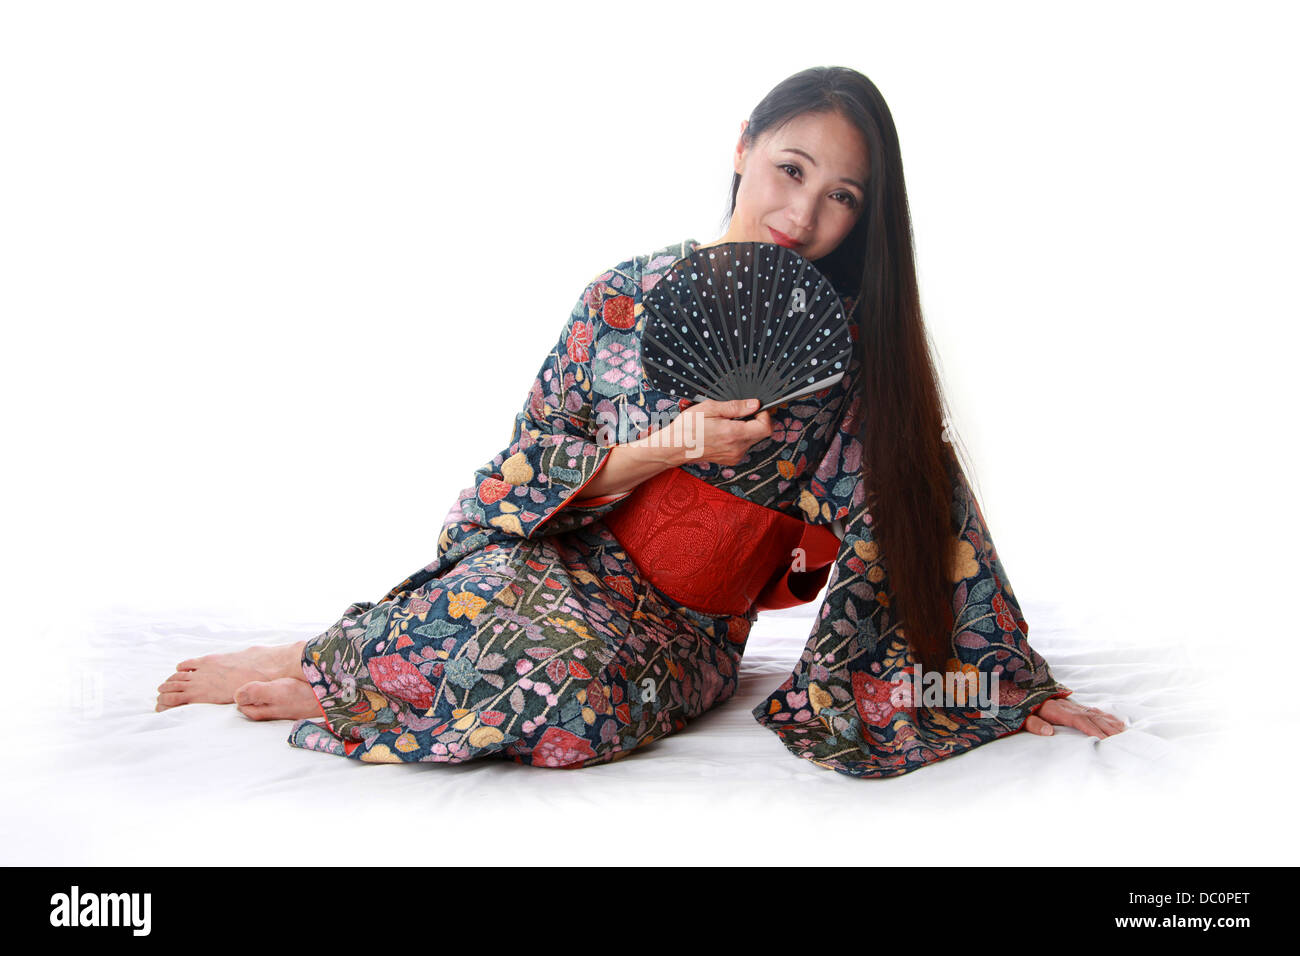 Japanese Lady Sitting on the Floor Wearing a Traditional Blue and Red Patterned Kimono and Holding a Fan Stock Photo